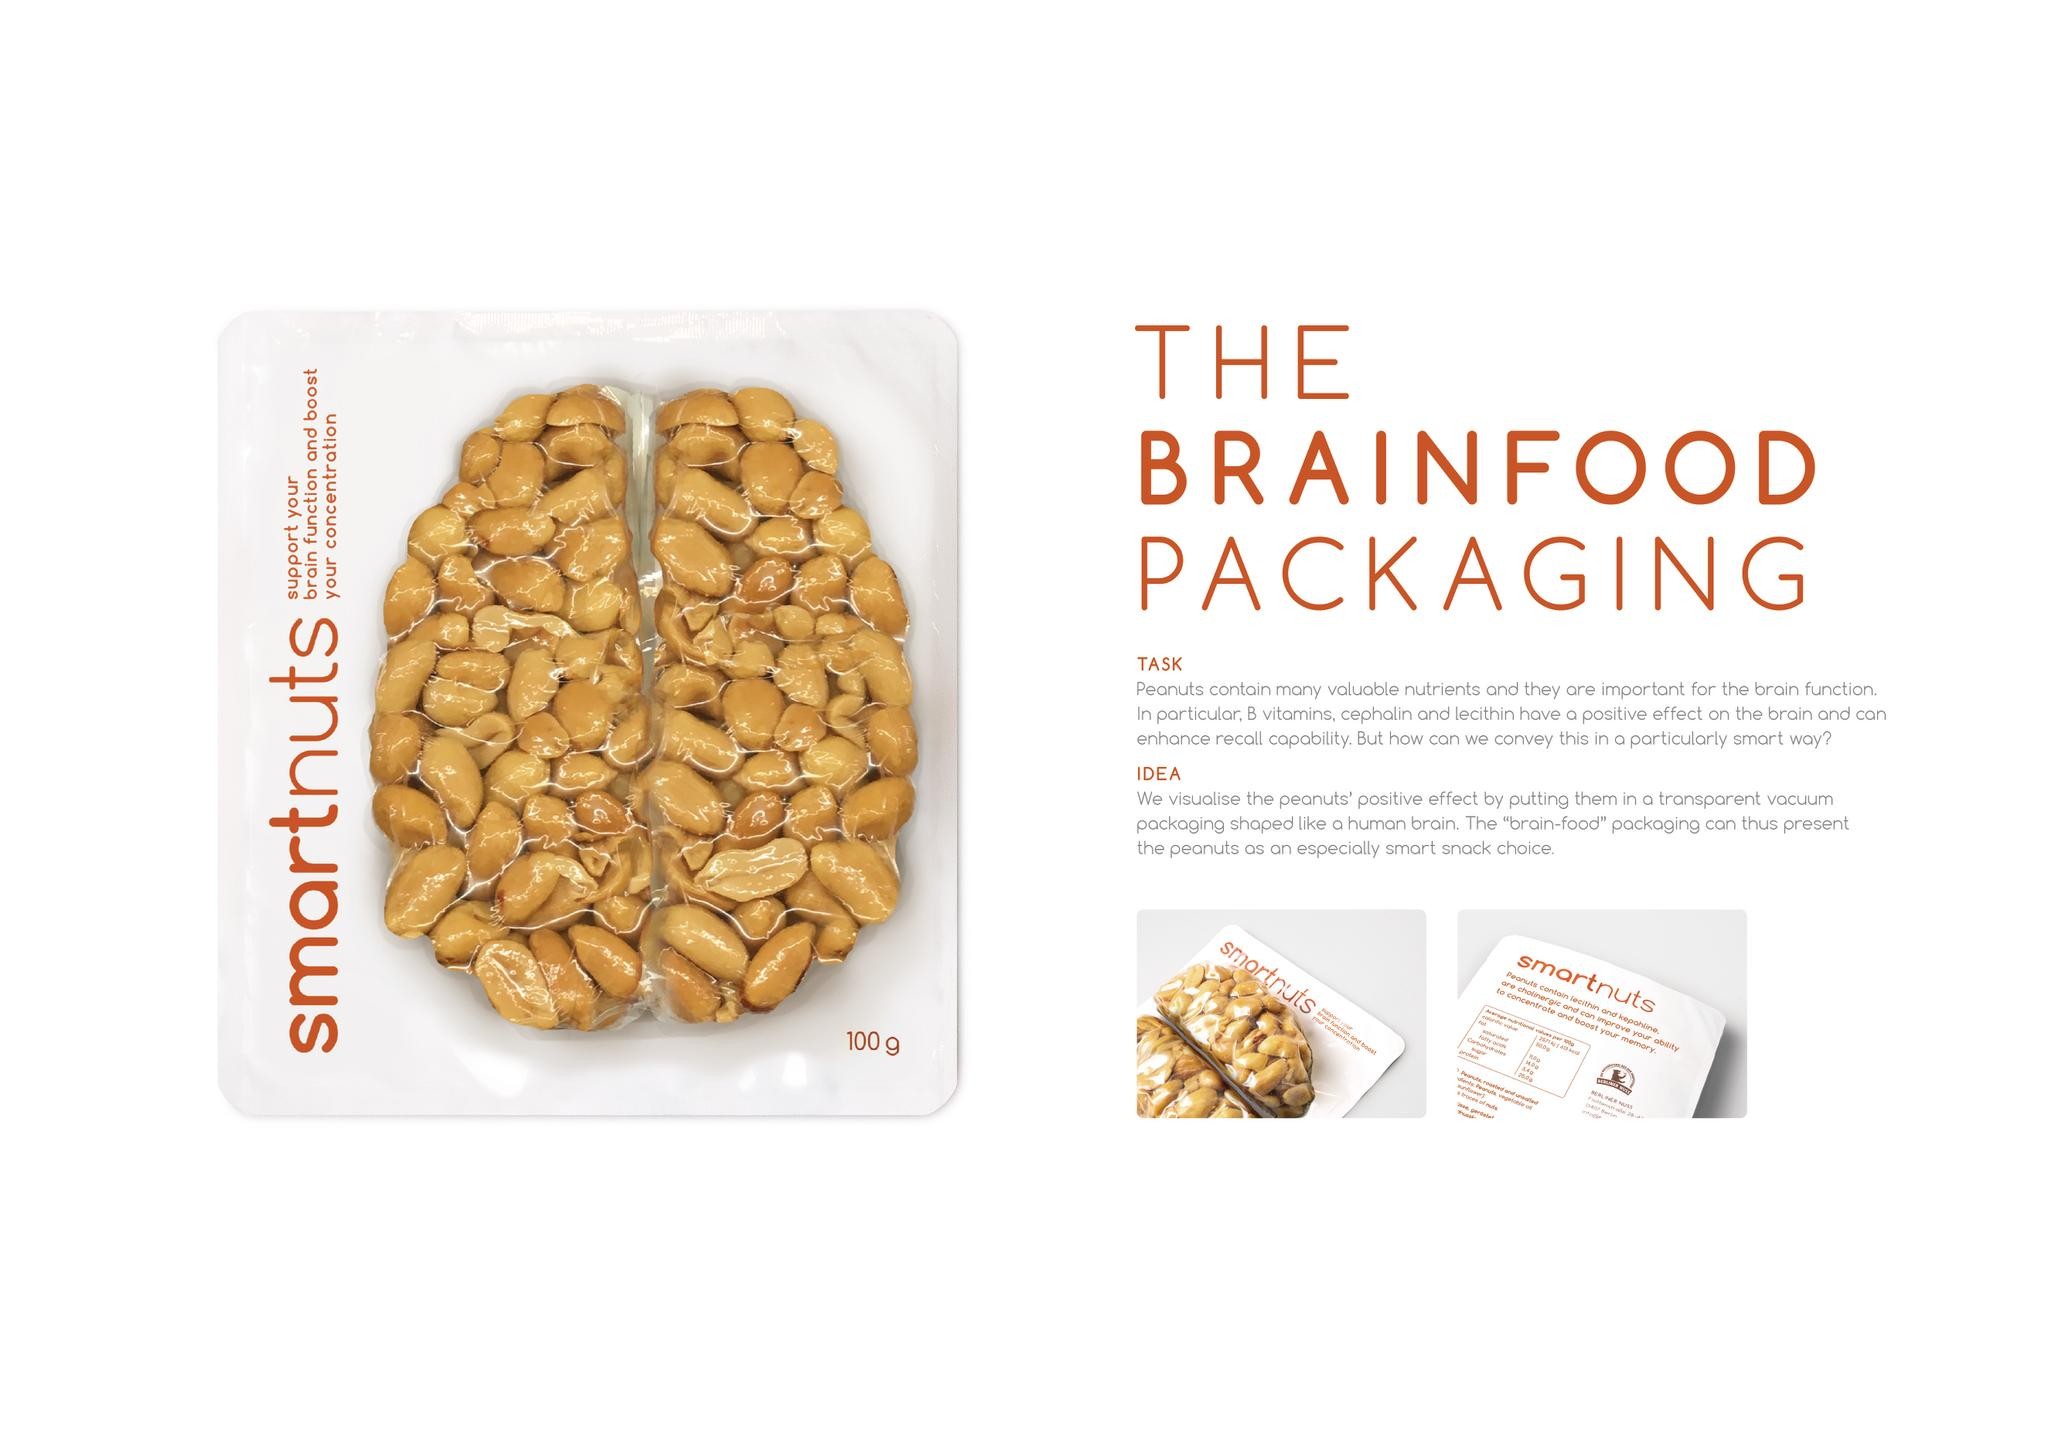 The brainfood packaging